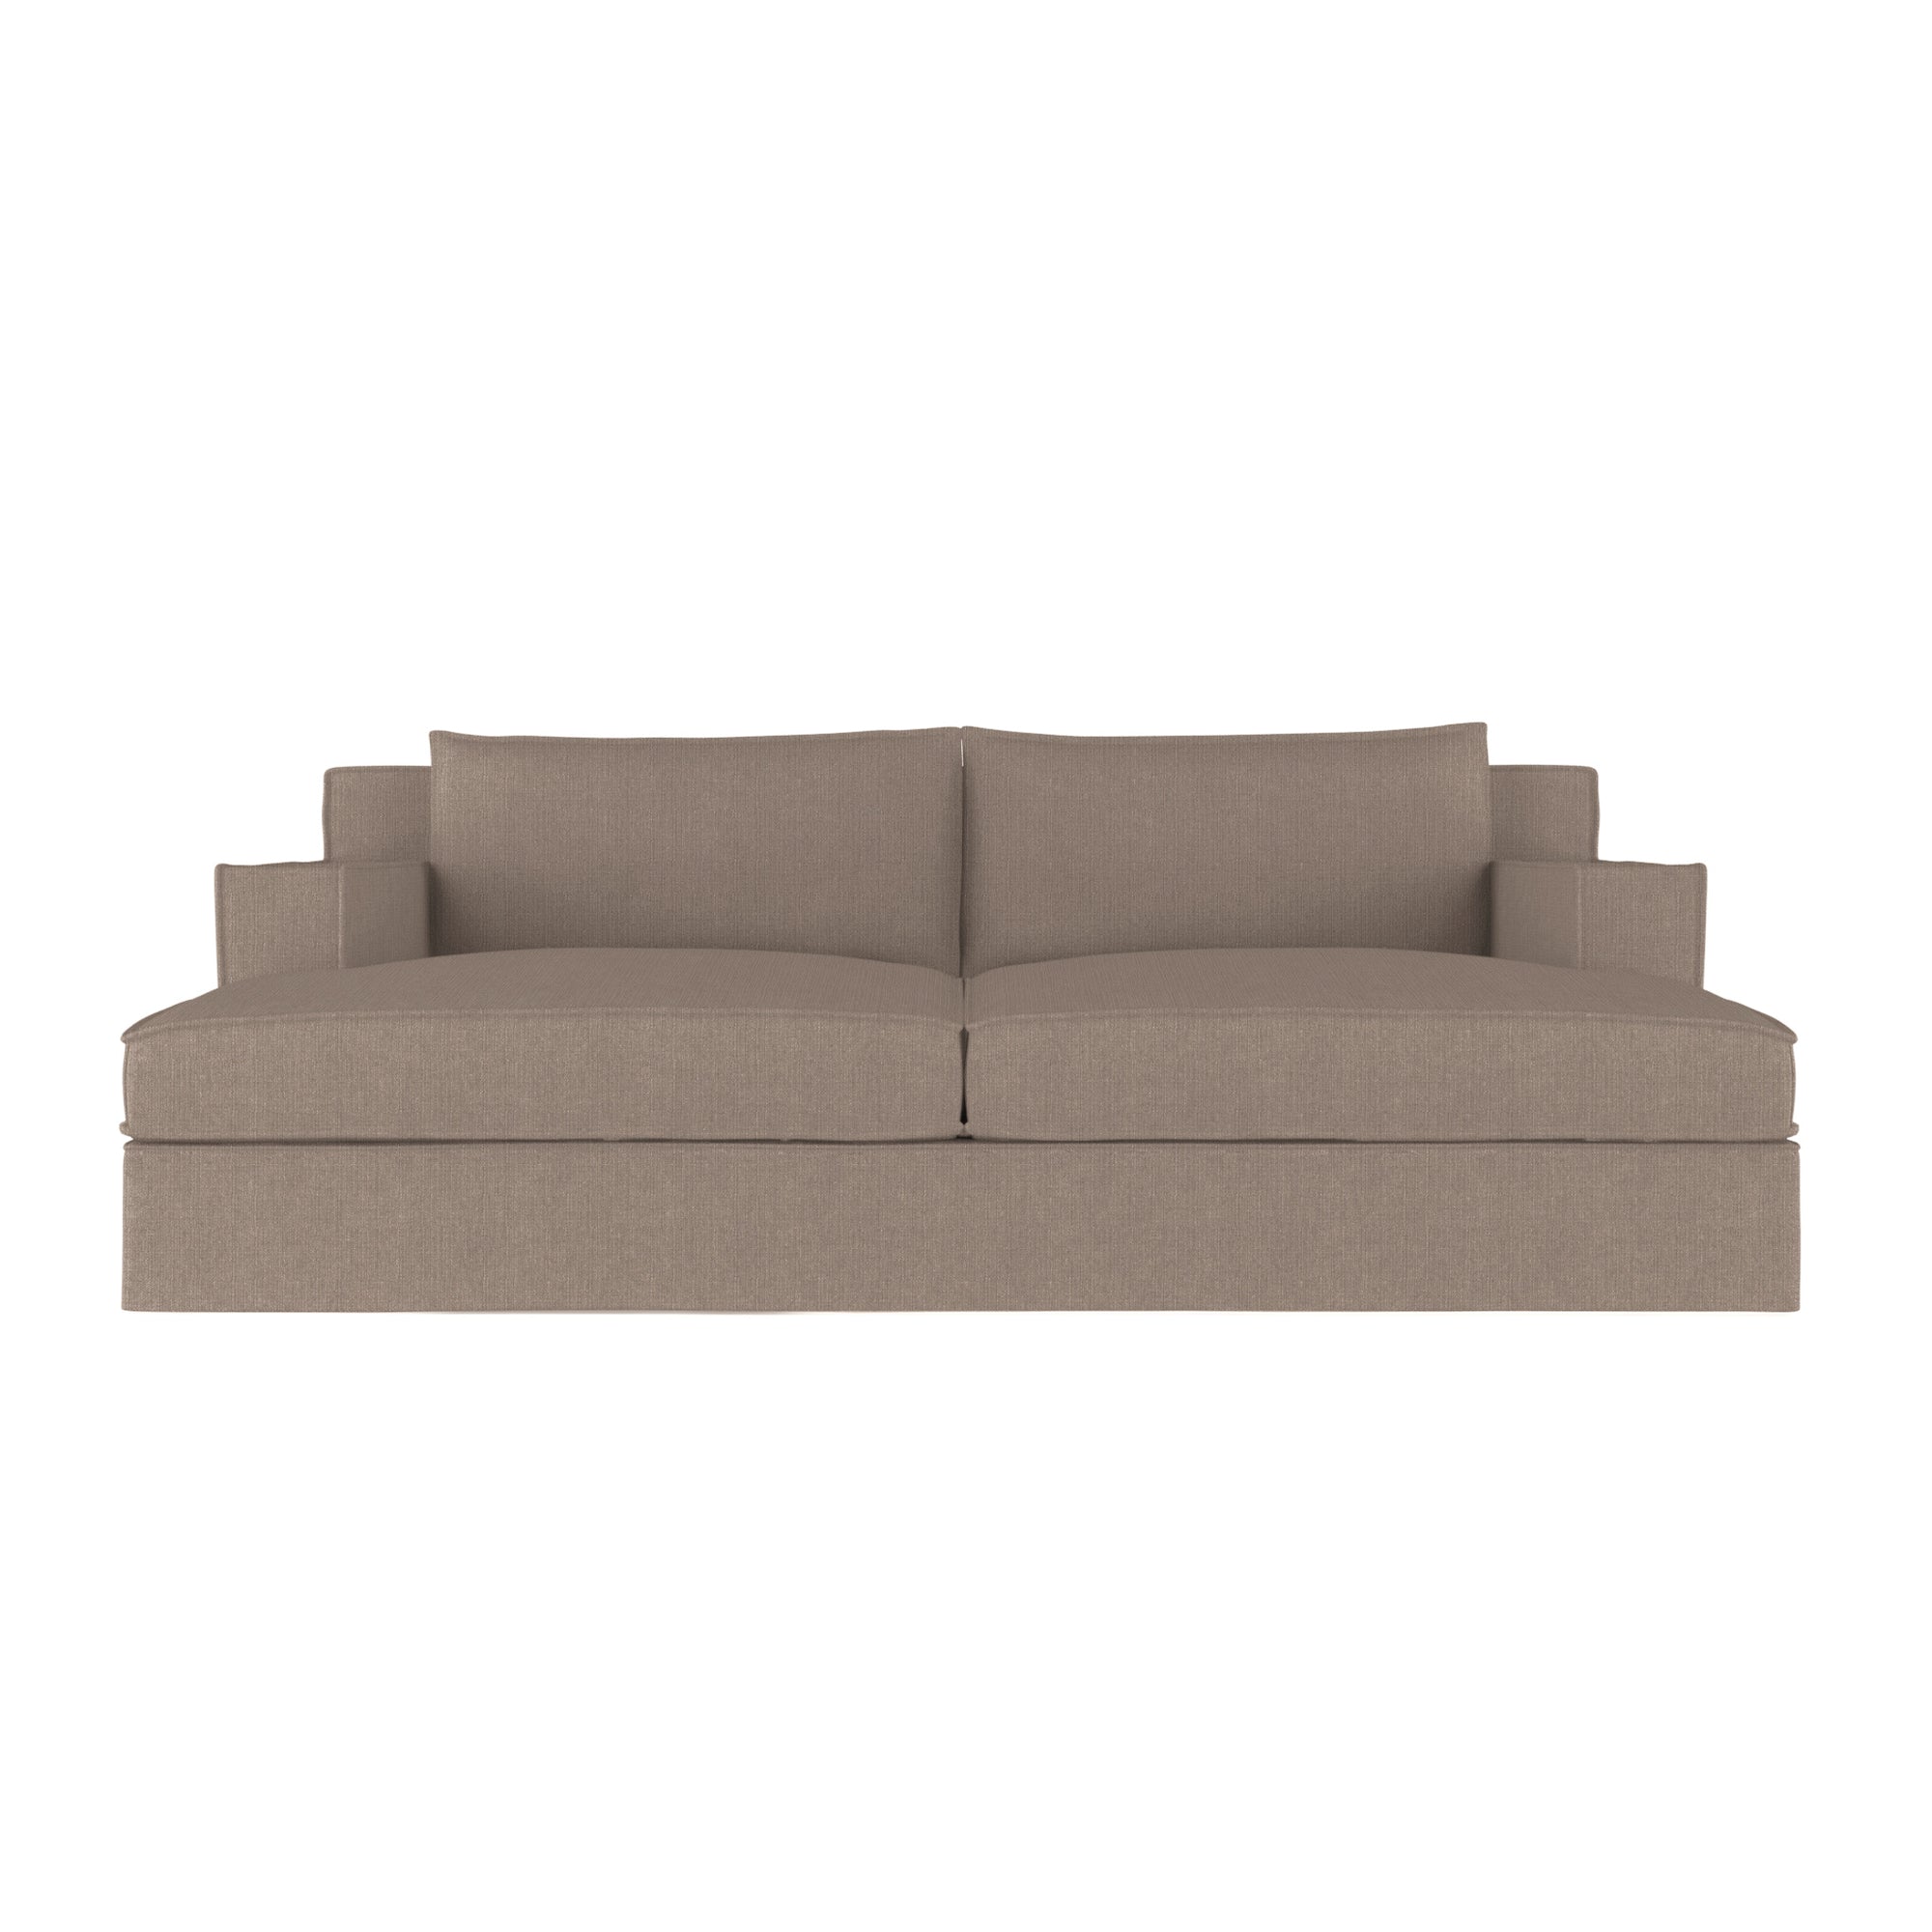 Mulberry Daybed - Pumice Box Weave Linen